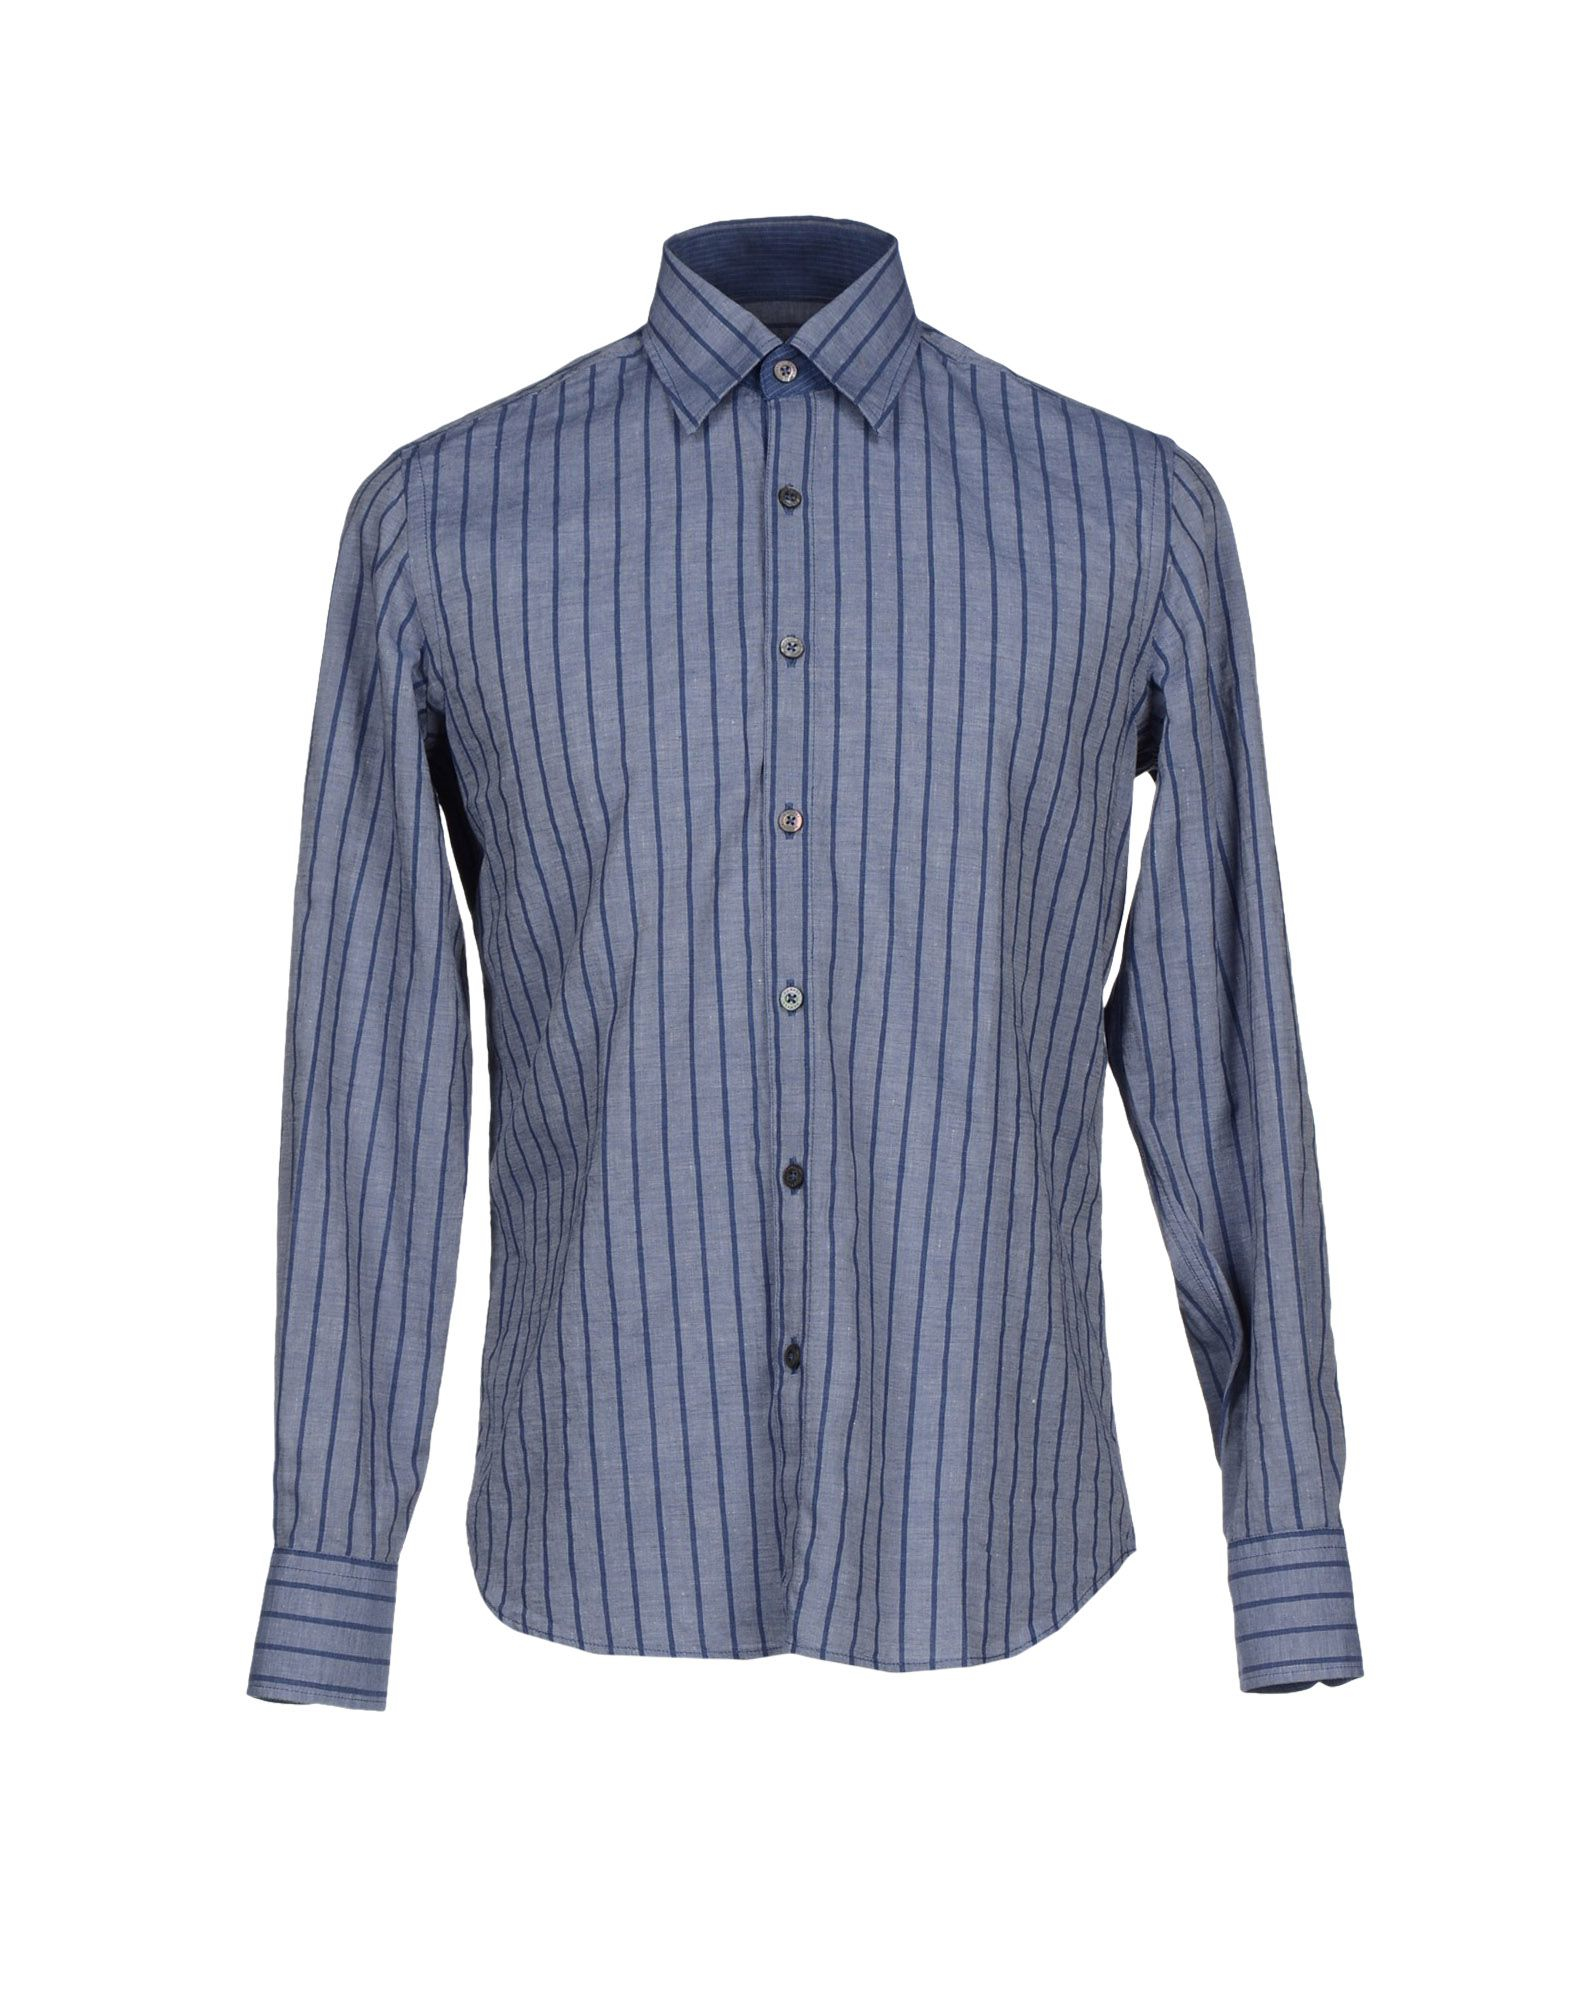 Lyst - Canali Shirt in Blue for Men